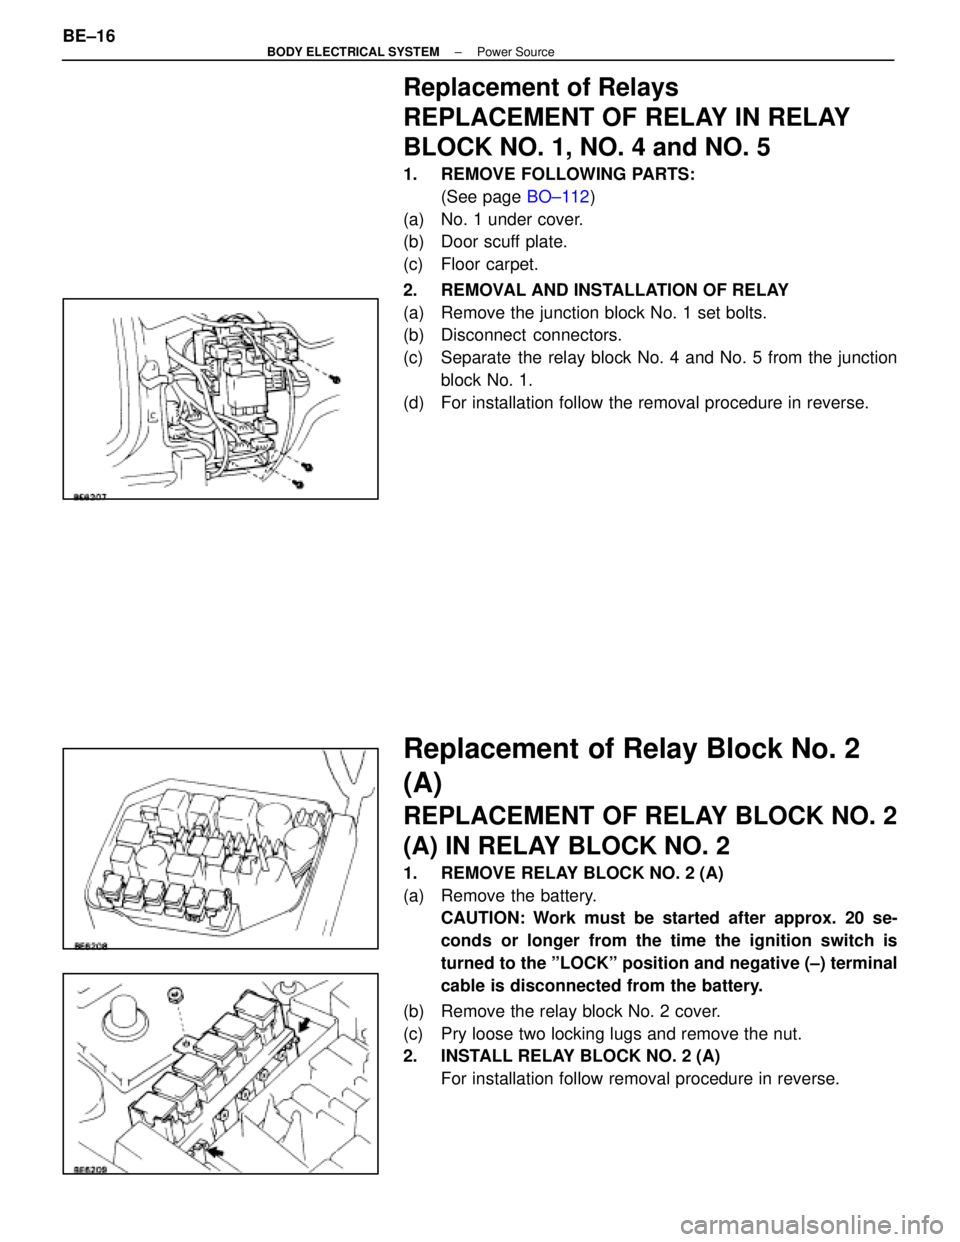 LEXUS SC400 1991  Service Repair Manual 
Replacement of Relays
REPLACEMENT OF RELAY IN RELAY
BLOCK NO. 1, NO. 4 and NO. 5
1.  REMOVE FOLLOWING PARTS:(See page  BO±112)
(a)  No. 1 under cover.
(b) Door scuff plate.
(c) Floor carpet.
2.  REM